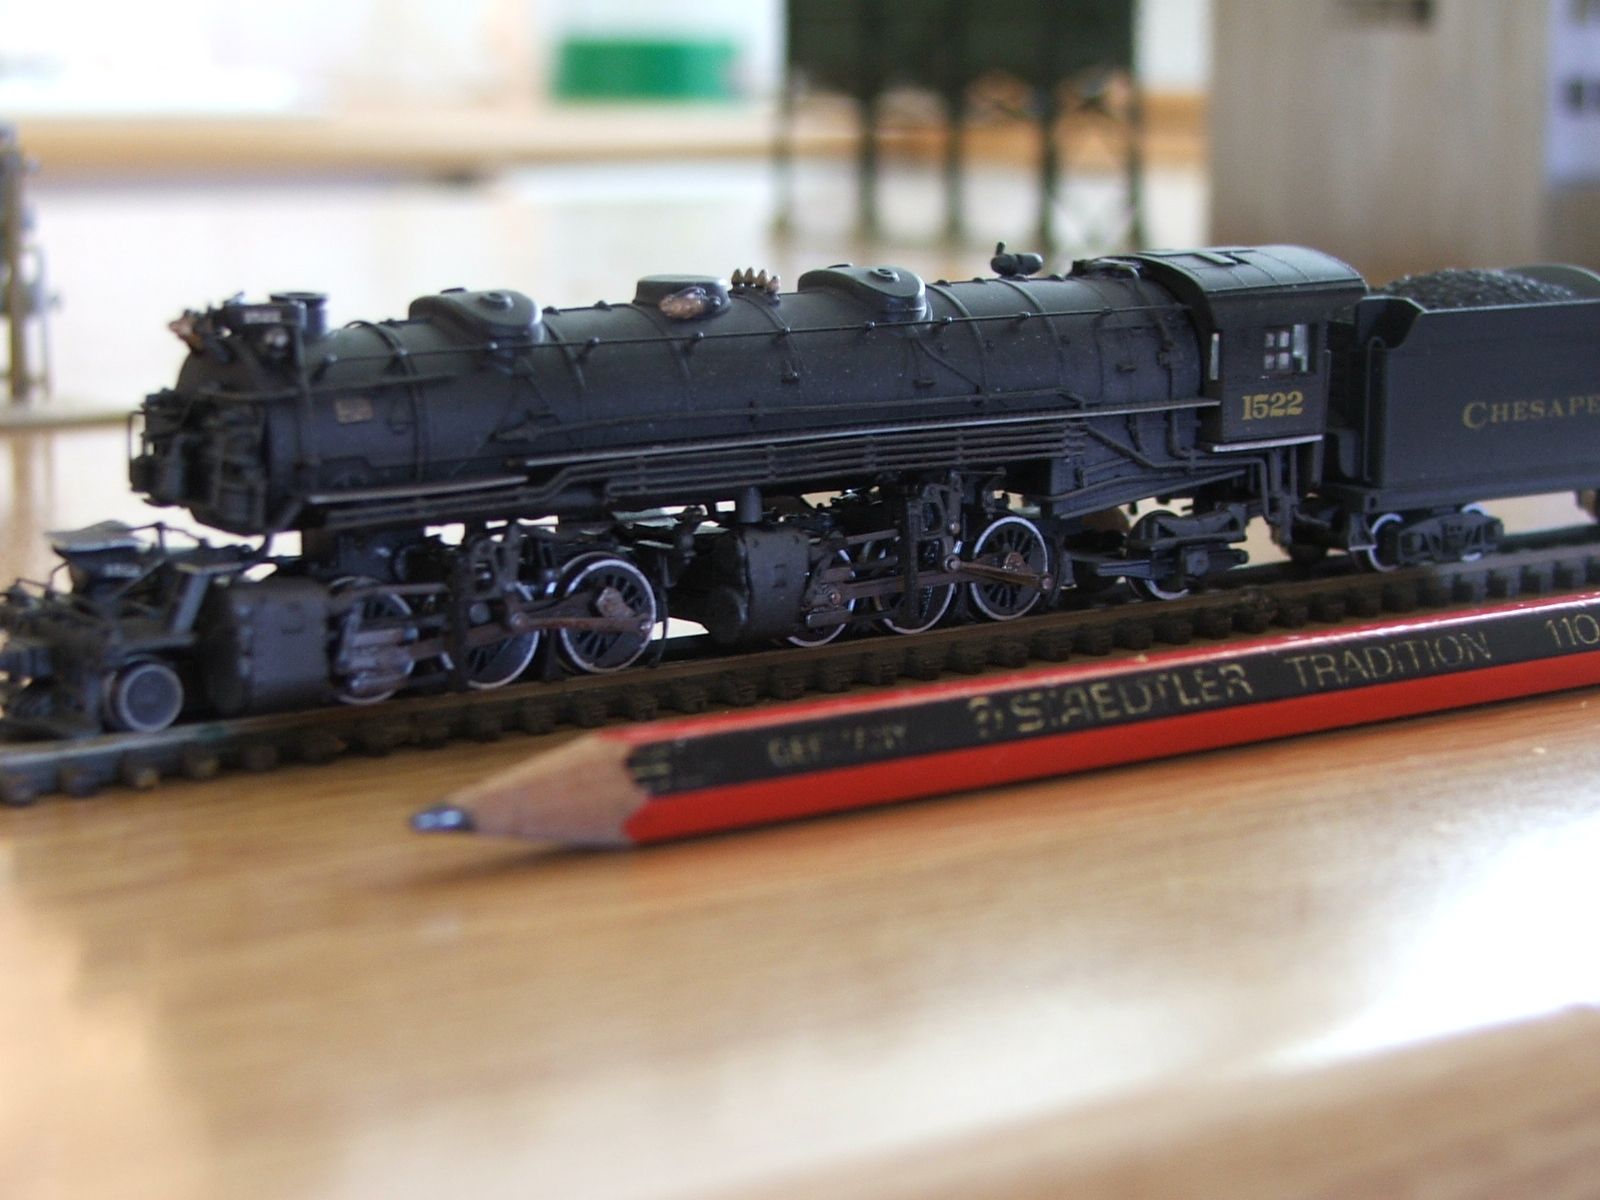  SCALE TRAINS | Tips And Creative Ideas On Building Model Train Layouts